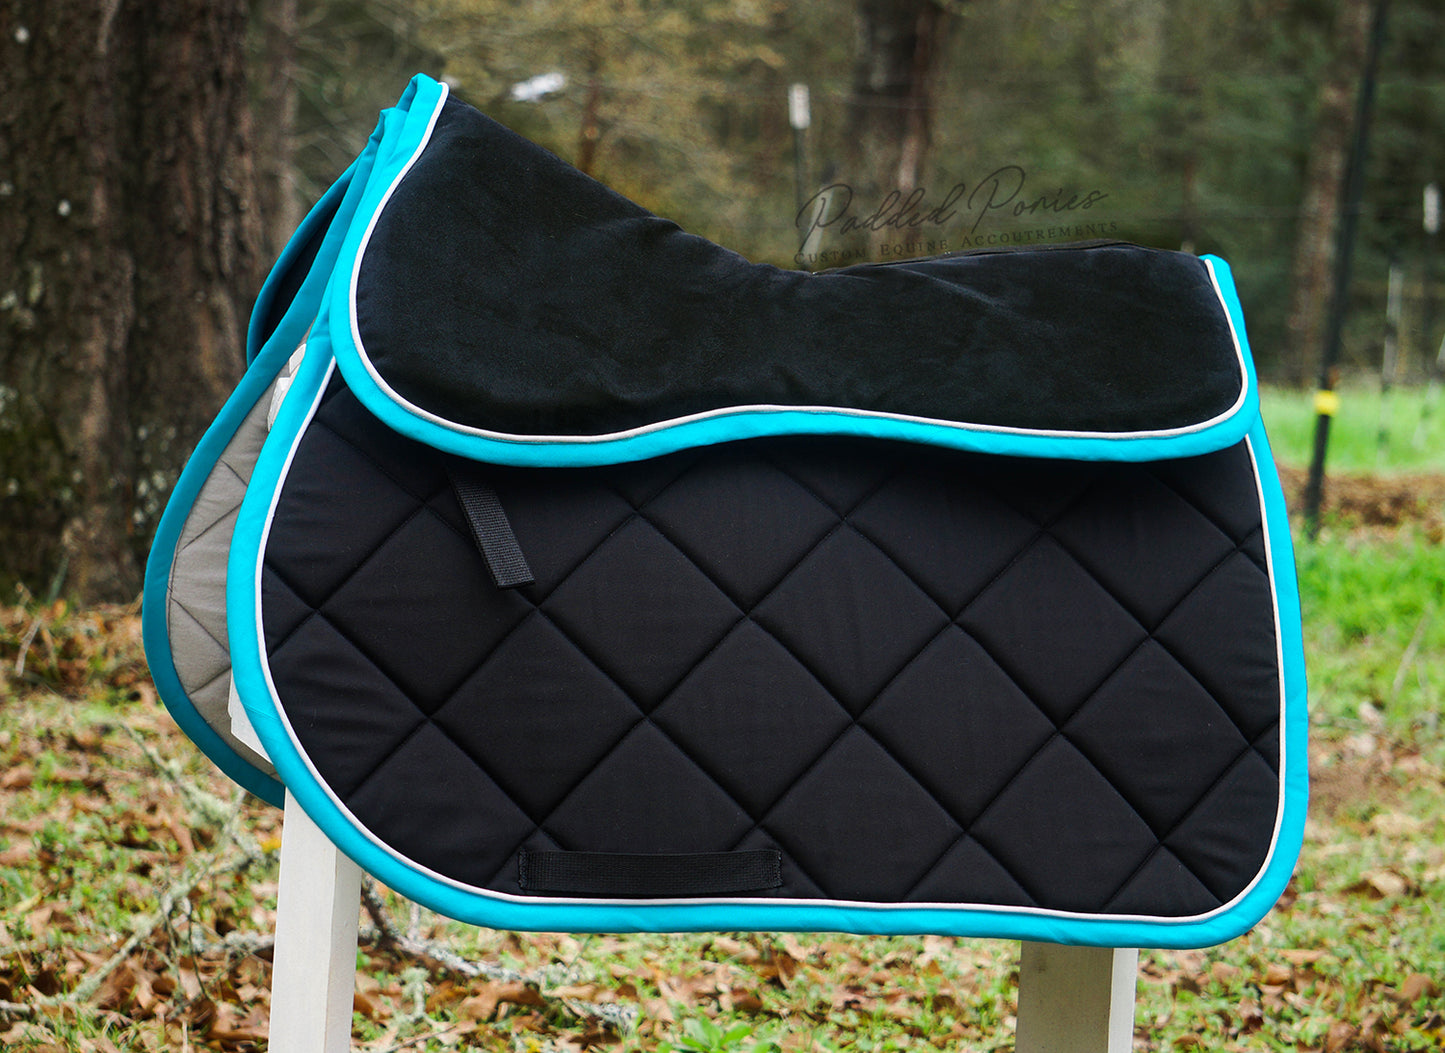 Black and Turquoise Suede Comfort Memory Foam Jump Half Pad with Matching Saddle Pad